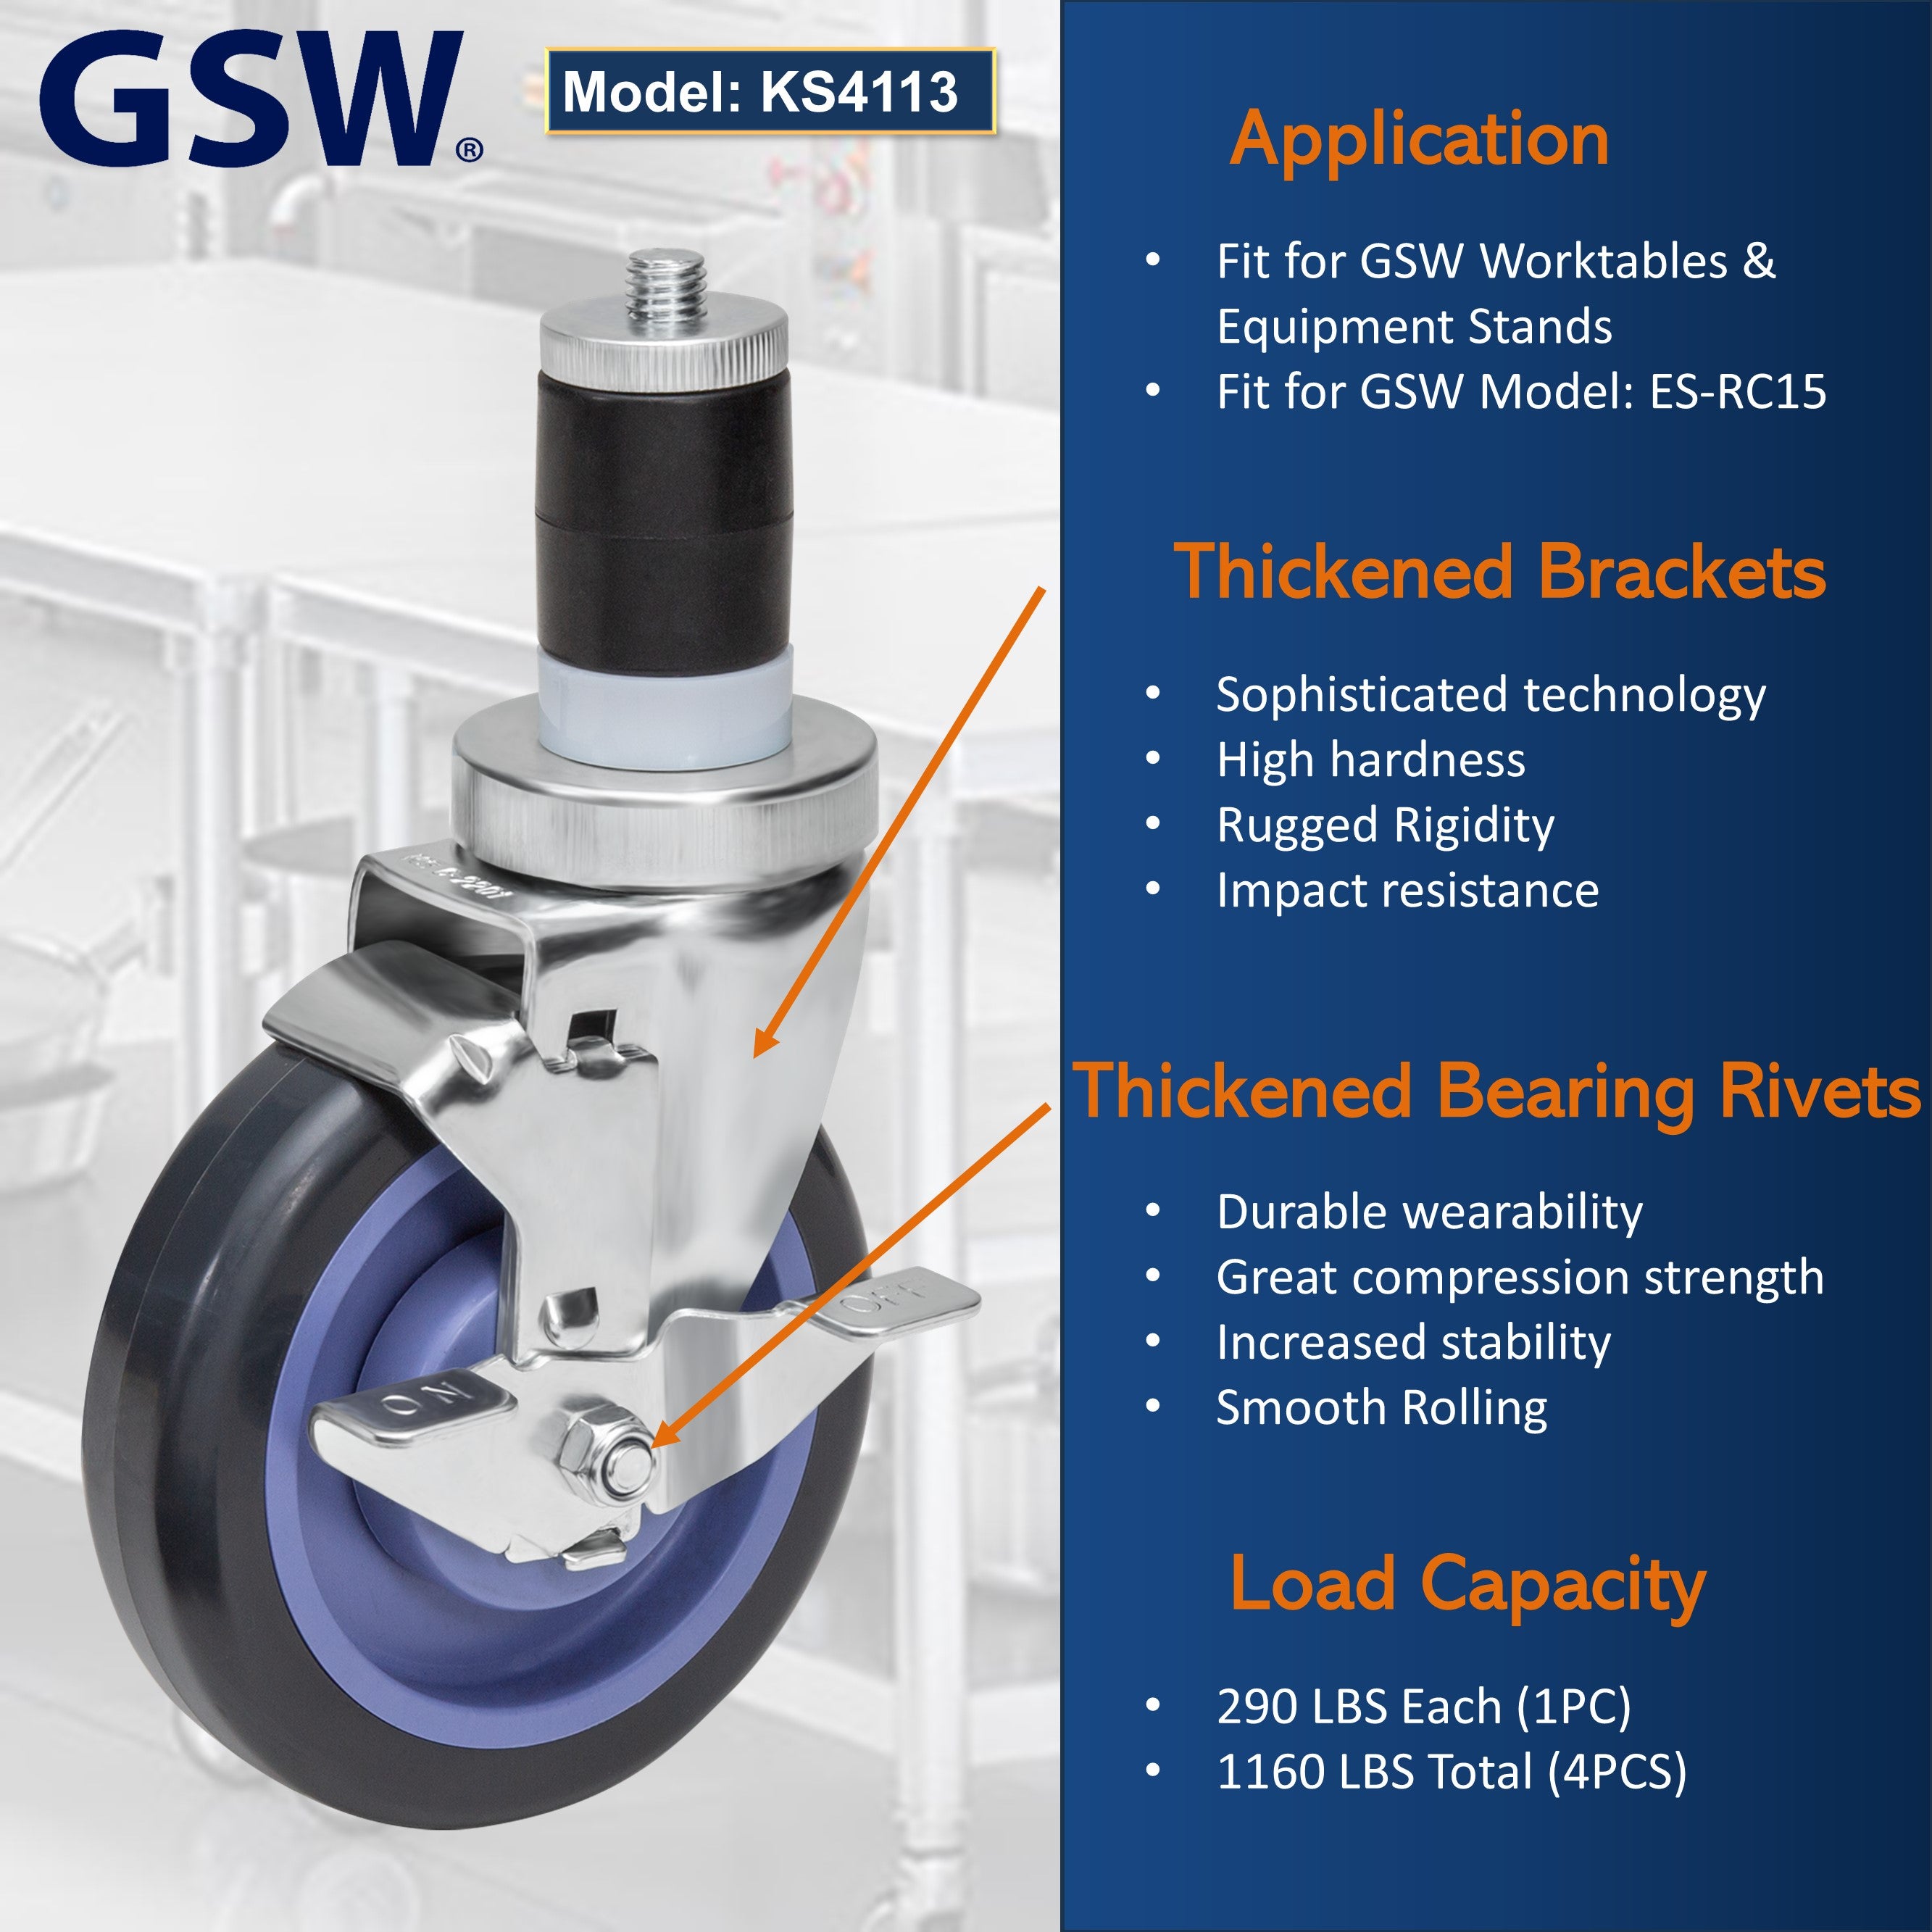 GSW 3" Heavy Duty Casters Wheels with Expanding Stem - Loading Capacity: 1160 lbs. Use for Worktables and Equipment Stands (Swivel with Brake)